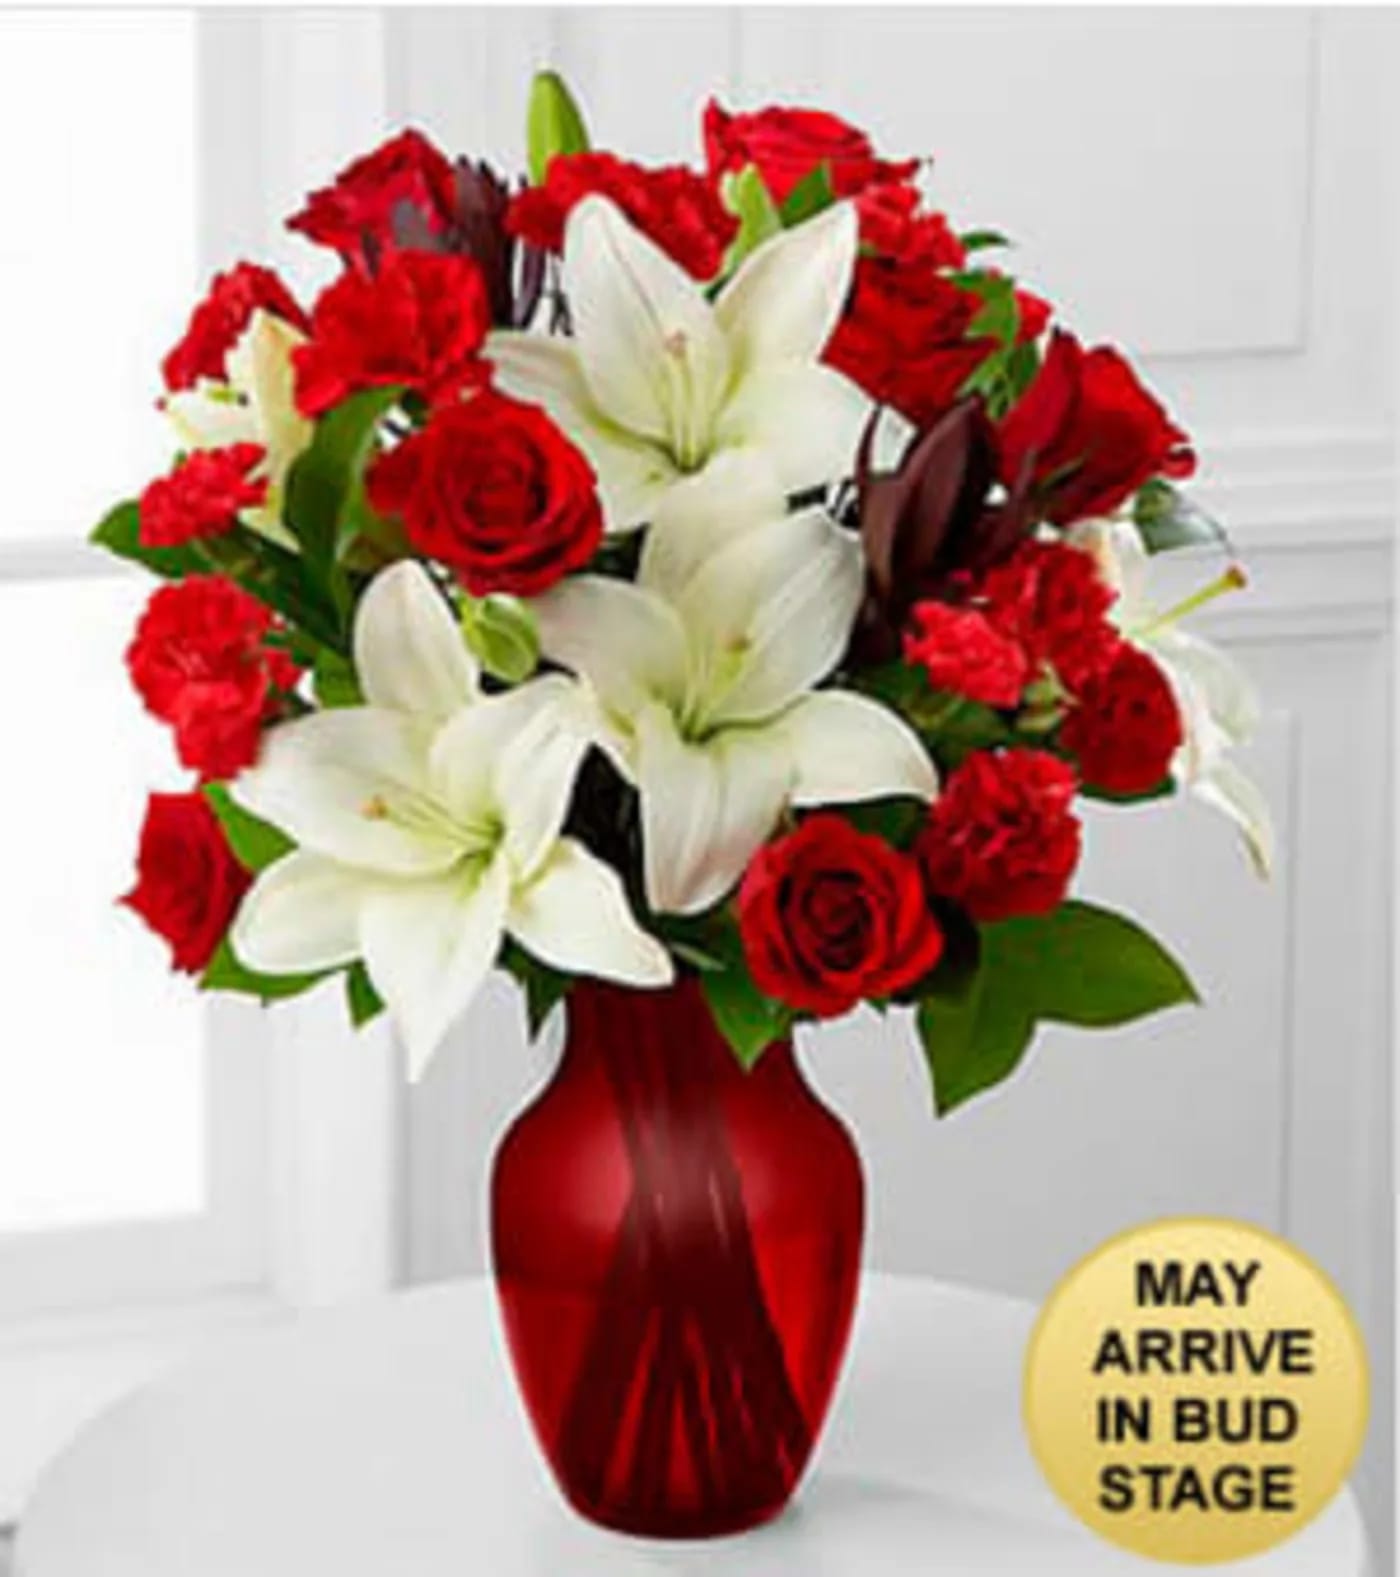 Hearts in Harmony Mixed Flower Bouquet - Picked fresh from the farm to offer your special recipient a gift blooming with romance and sweet affection, our stunning Hearts in Harmony Mixed Flower Bouquet is a classic romantic gesture that will melt their heart at every turn. Hand gathered in select floral farms and flaunting the eye-catching combination of red and white, this stunning flower arrangement has been picked fresh for you to help you celebrate a birthday, anniversary, or to convey your heart's true wish. This bouquet includes the following: red roses, white Asiatic Lilies, red carnations, red mini carnations, and an assortment of lush greens. Presented with a red glass vase.  BETTER bouquet is approximately 18&quot;H x14&quot;W. *May Arrive in Bud Stage. Your purchase includes a complimentary personalized gift message.